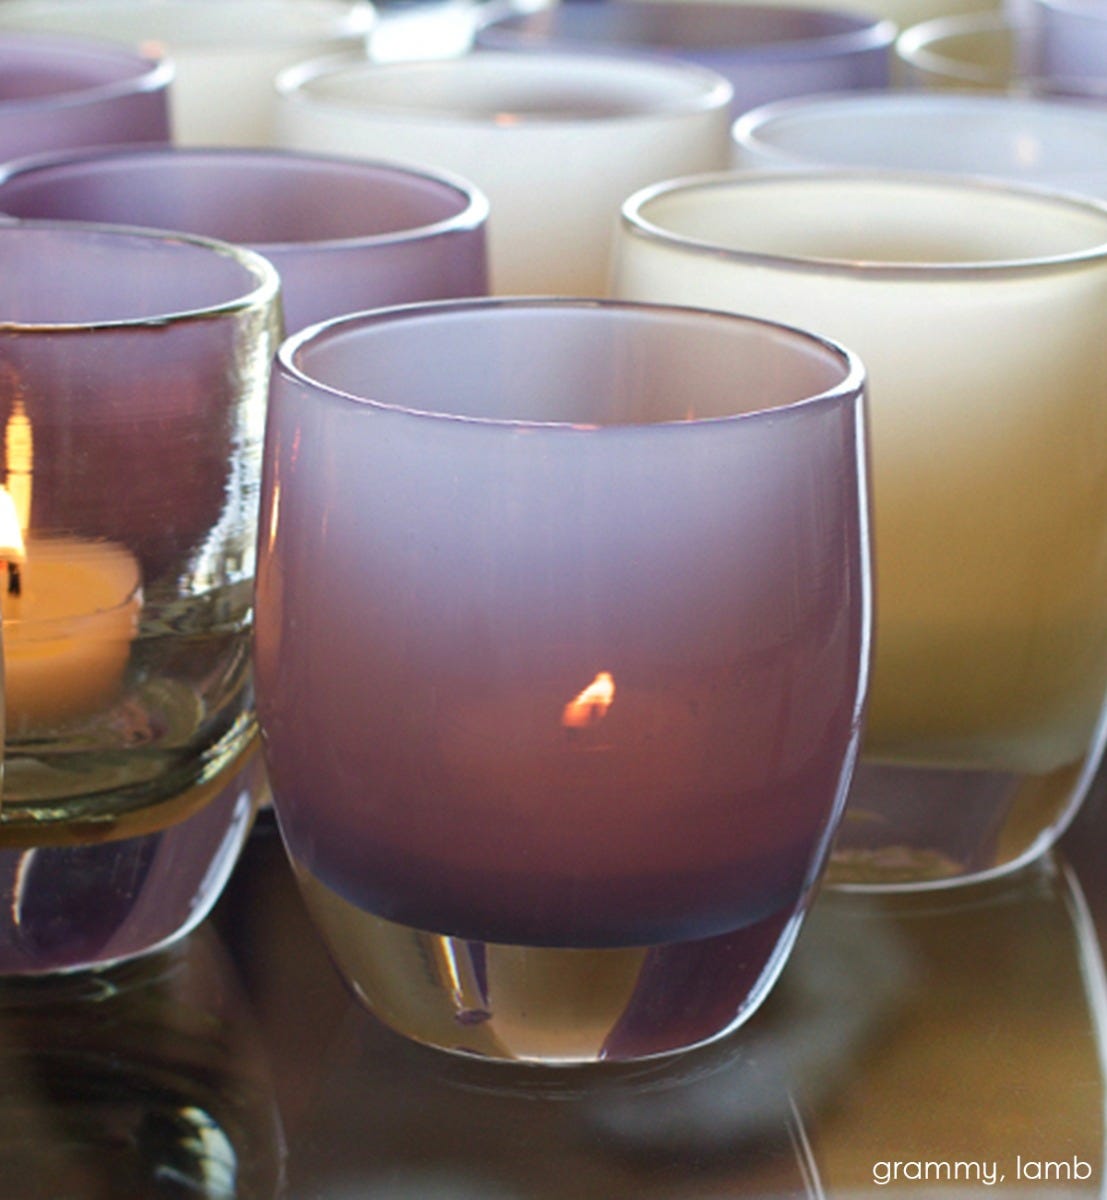 grammy, soft purple hand-blown glass votive candle holder. Paired with lamb.